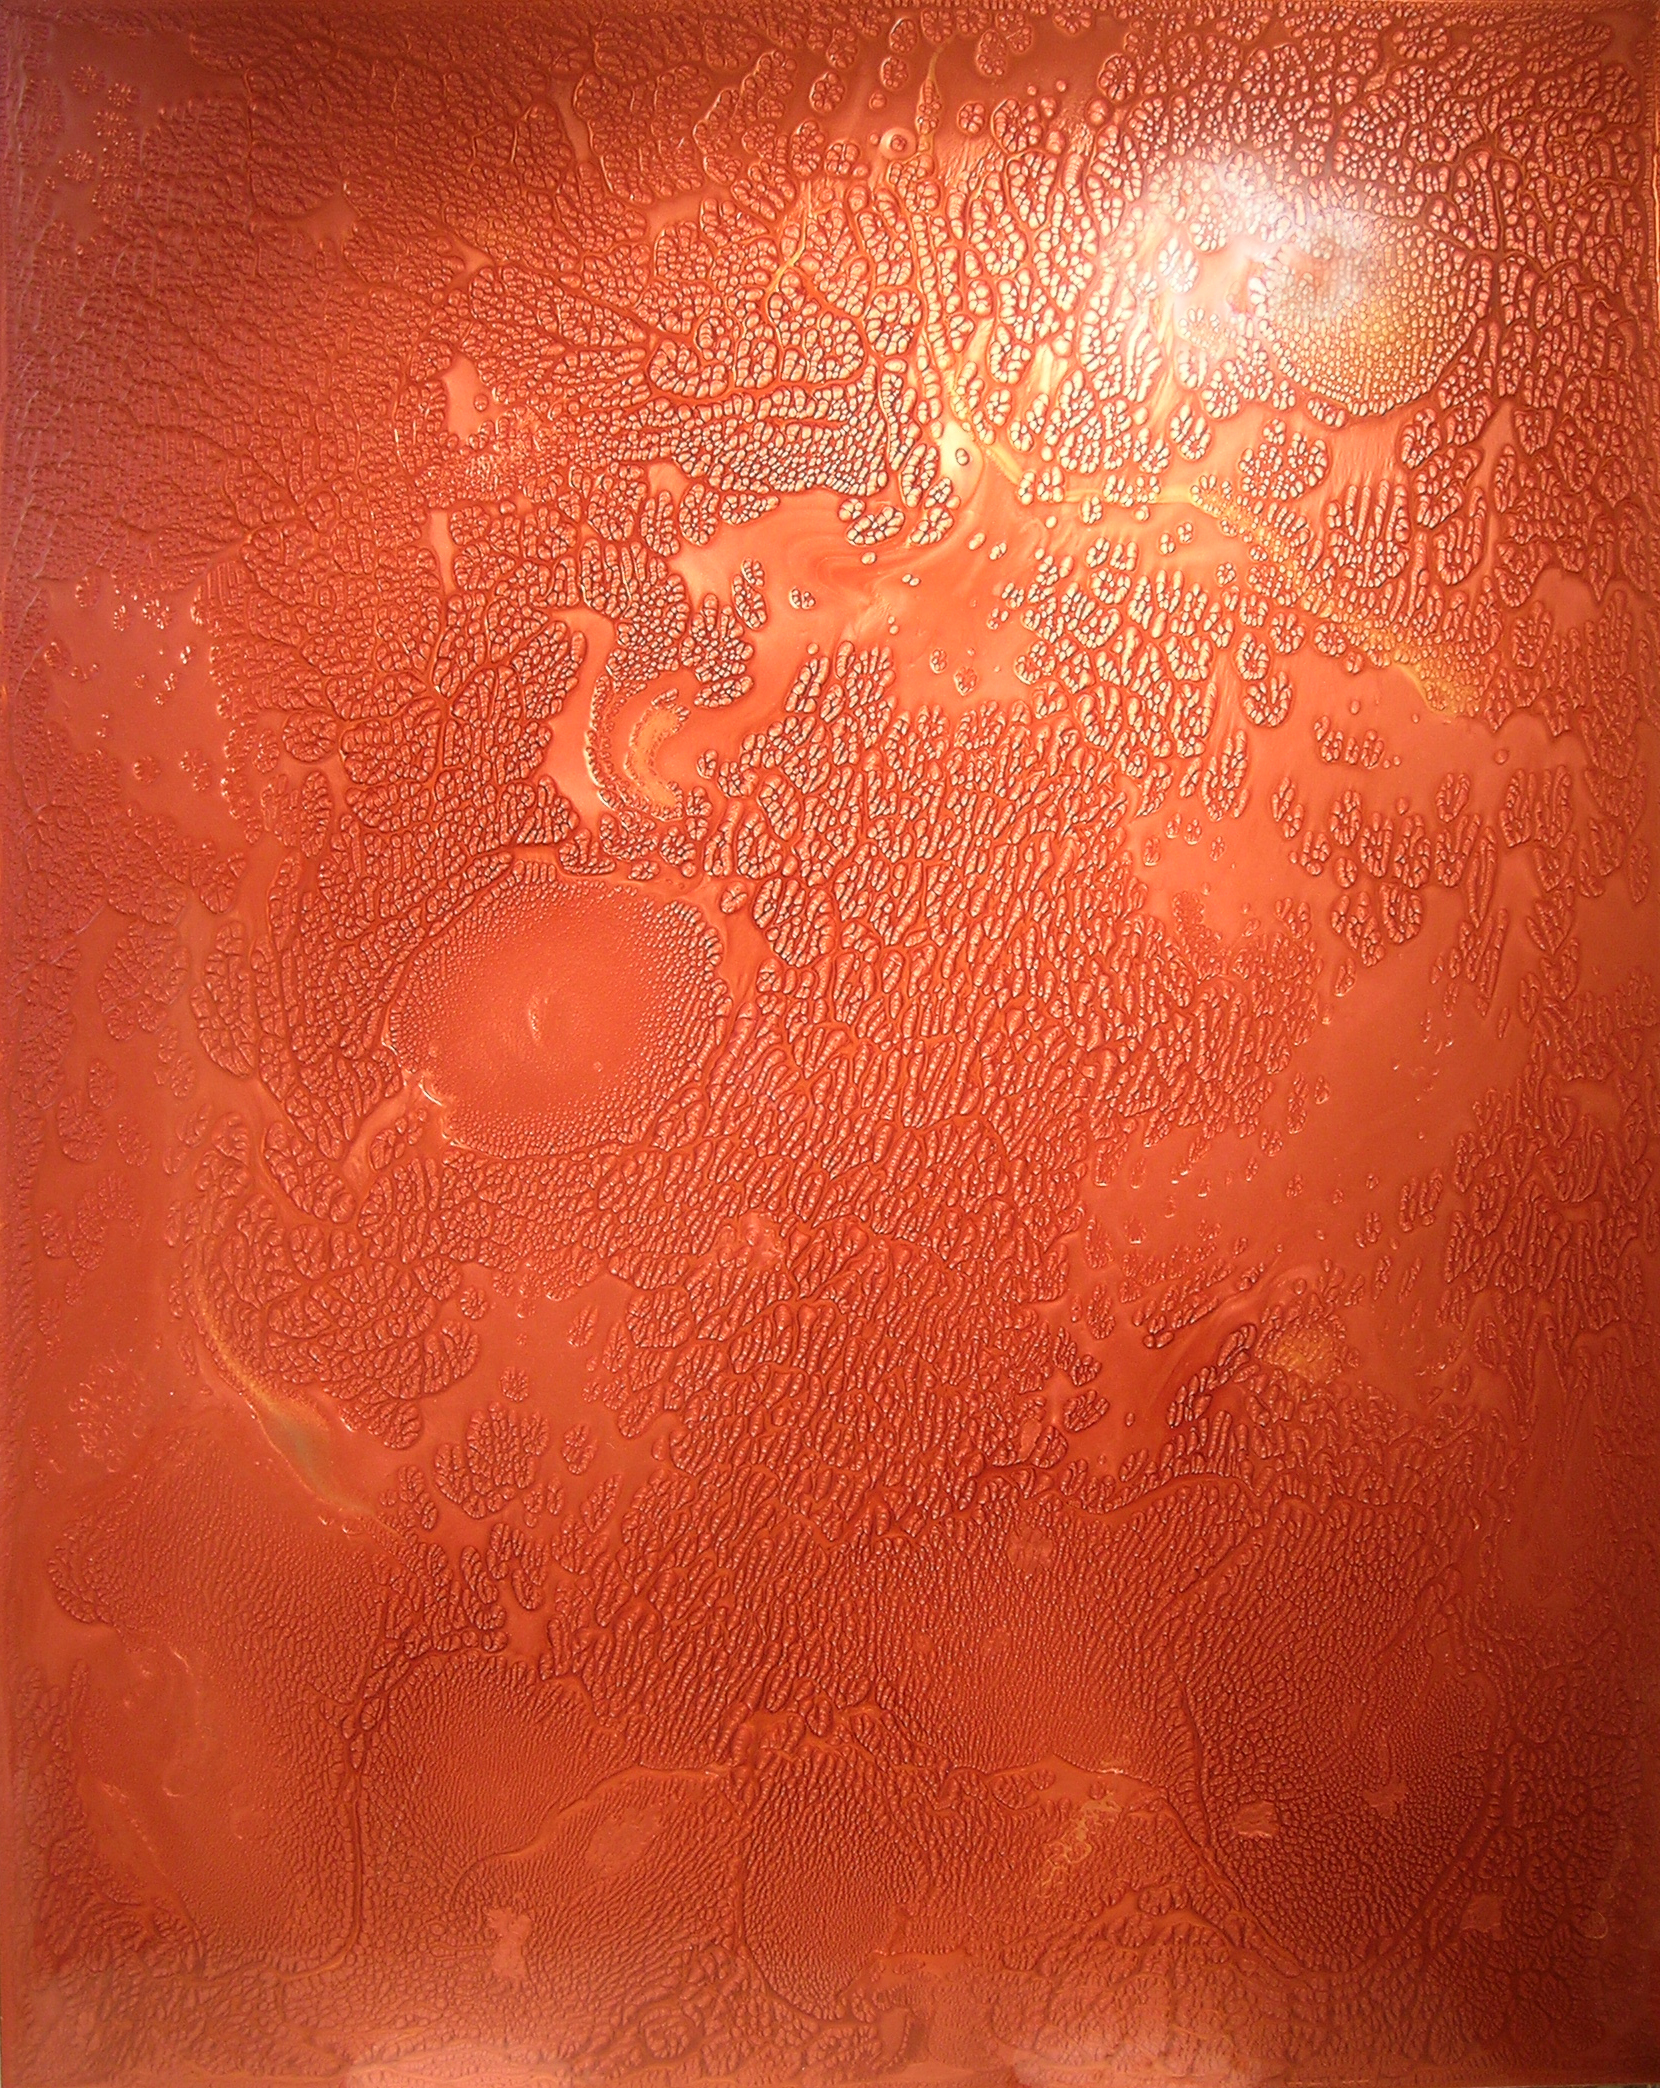 Quantum Theory, 2005, 60 inches by 48 inches Private Collection